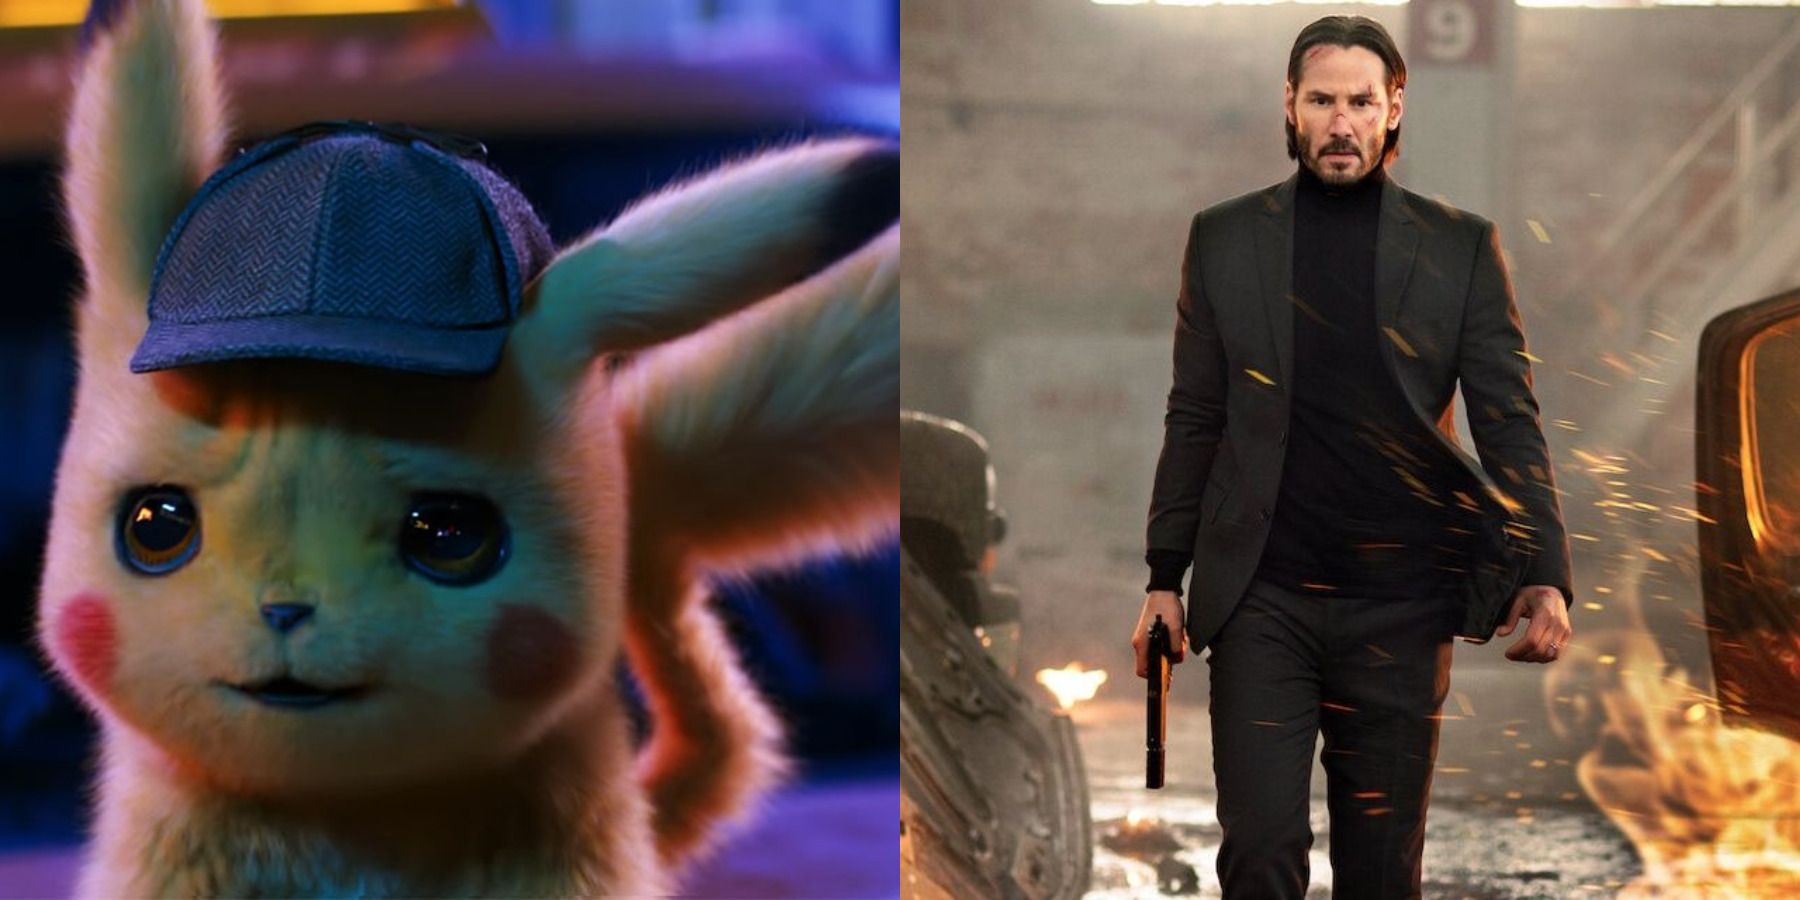 Action movies with best world-building feature split image Pokémon: Detective Pikachu and John Wick